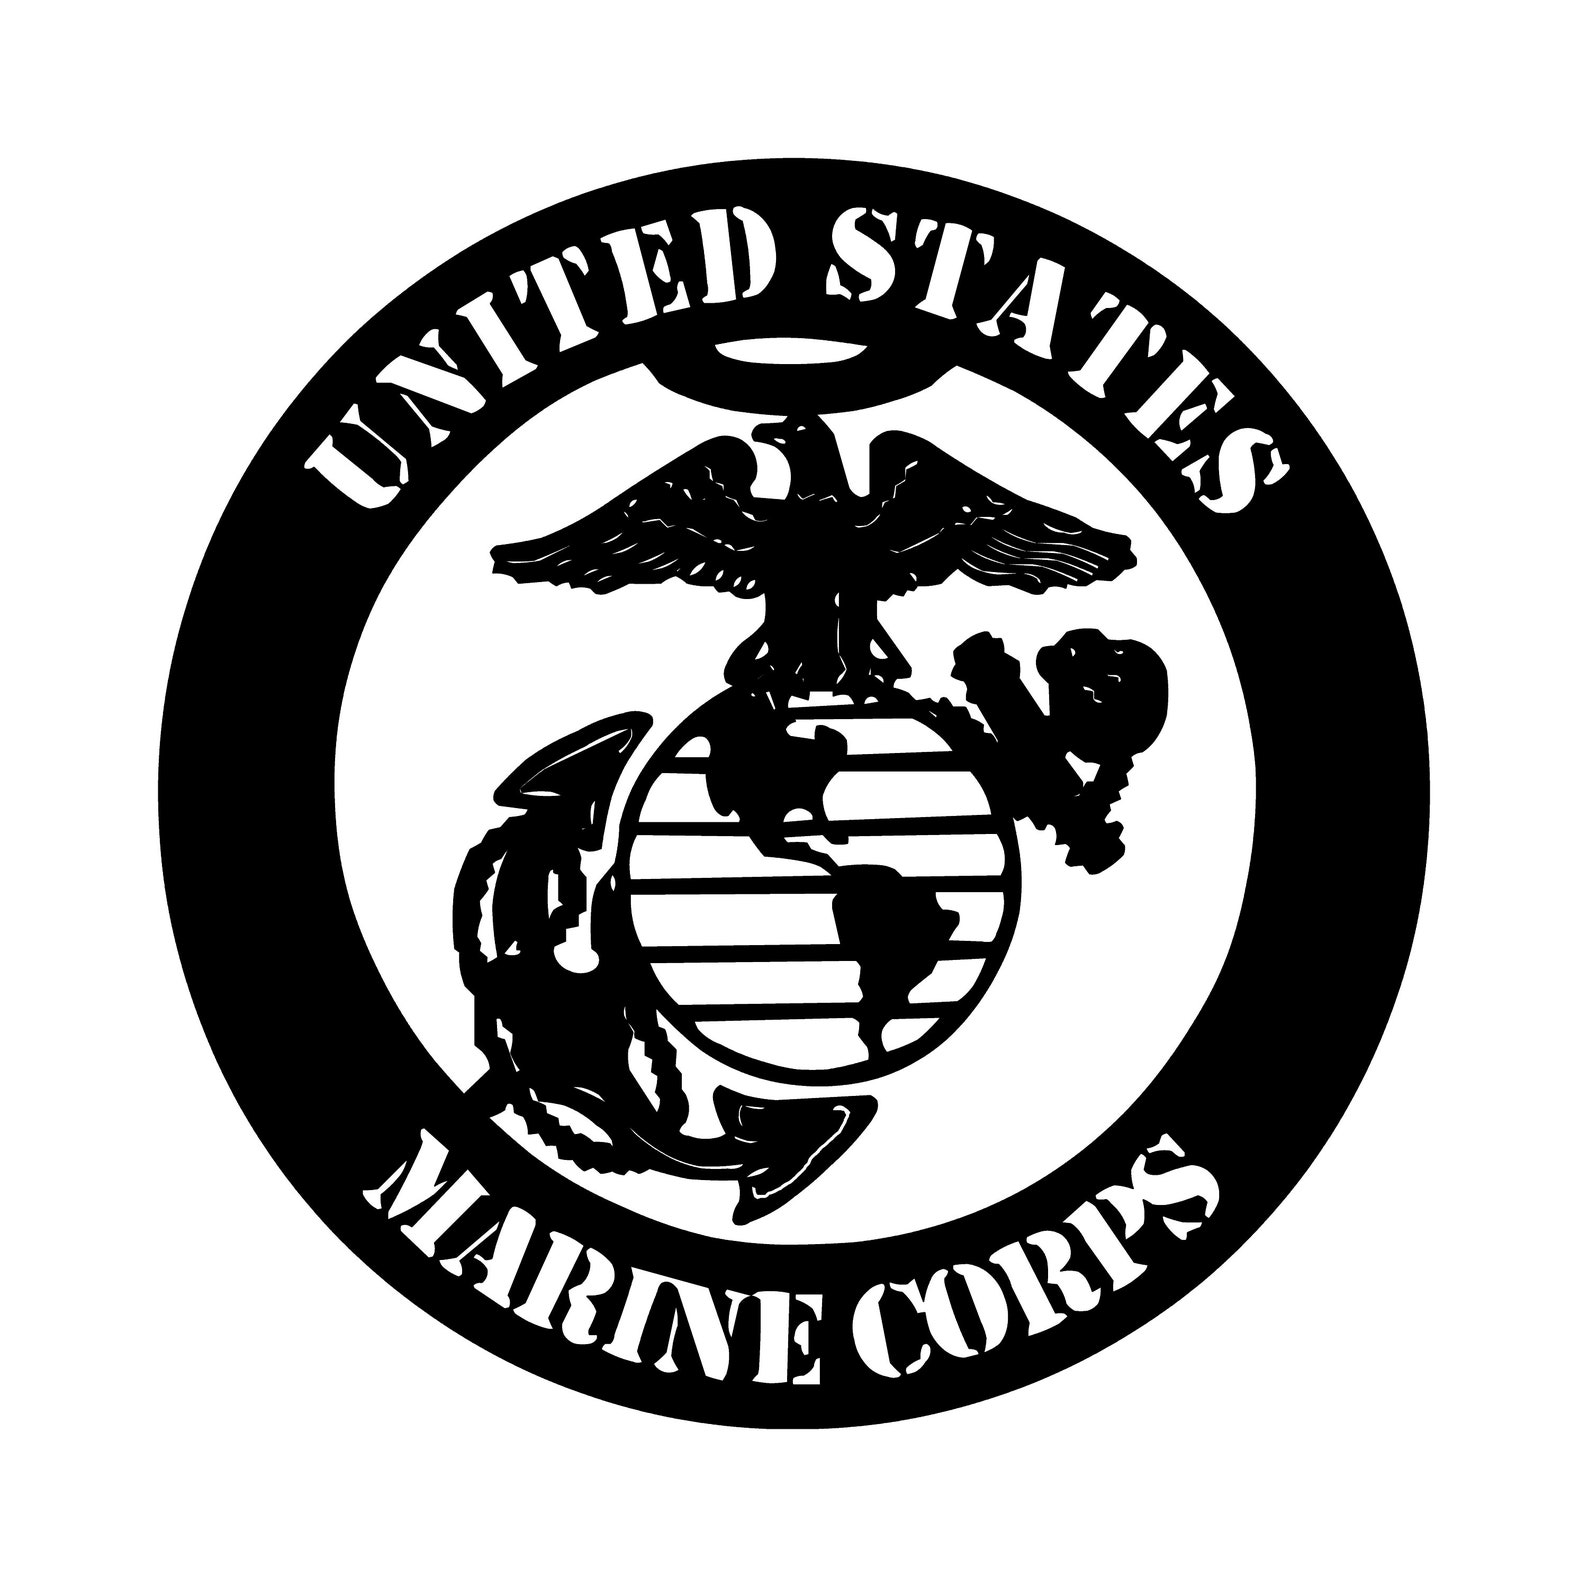 United States Marine Corps Metal Sign Cutout | Etsy